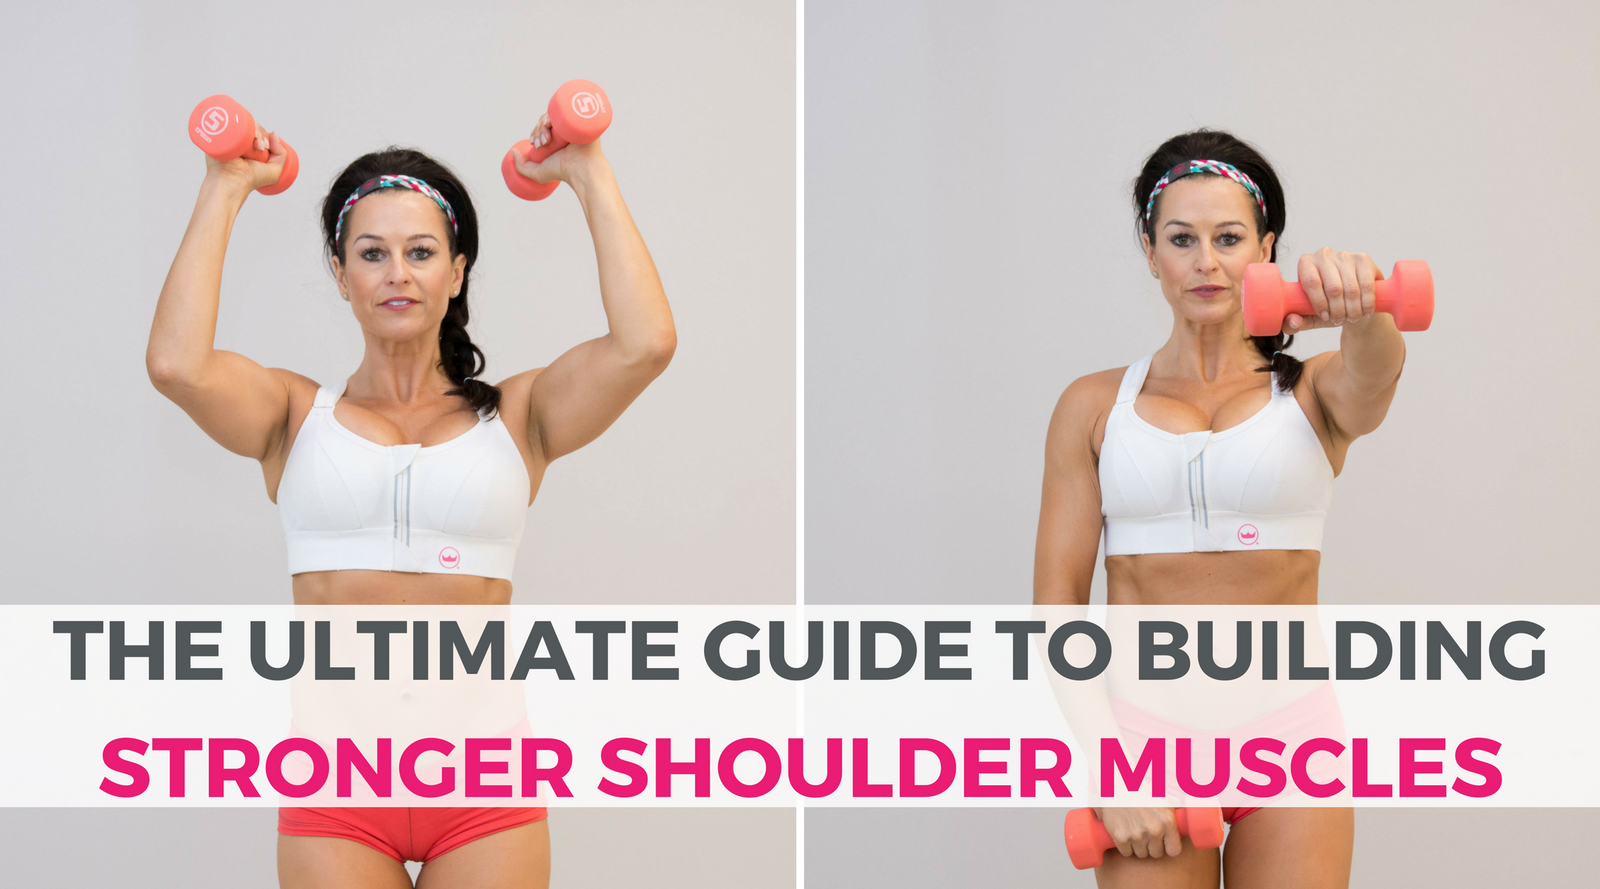 How to Get Strong, Sexy Shoulders in 12 Simple Fat-Burning Moves